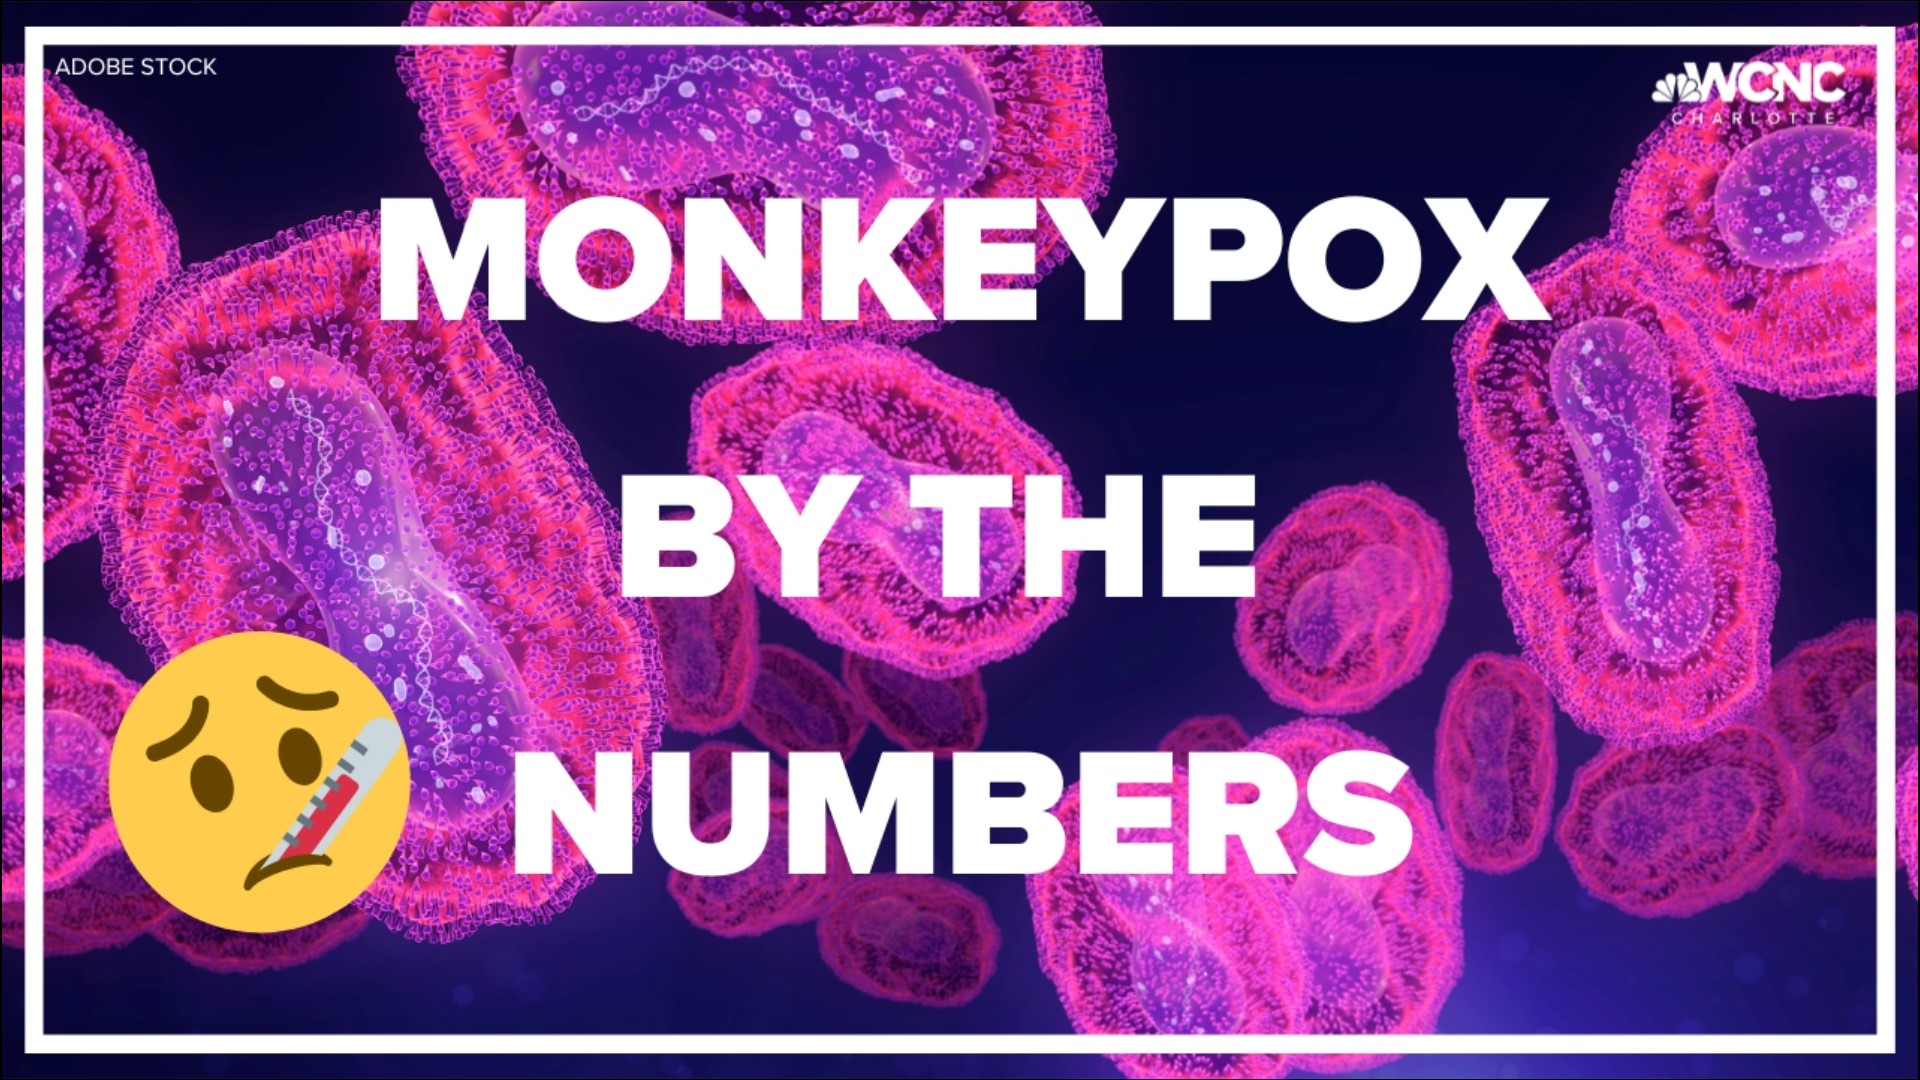 State health officials are sharing more granular information about North Carolina's monkeypox cases in this week's update.